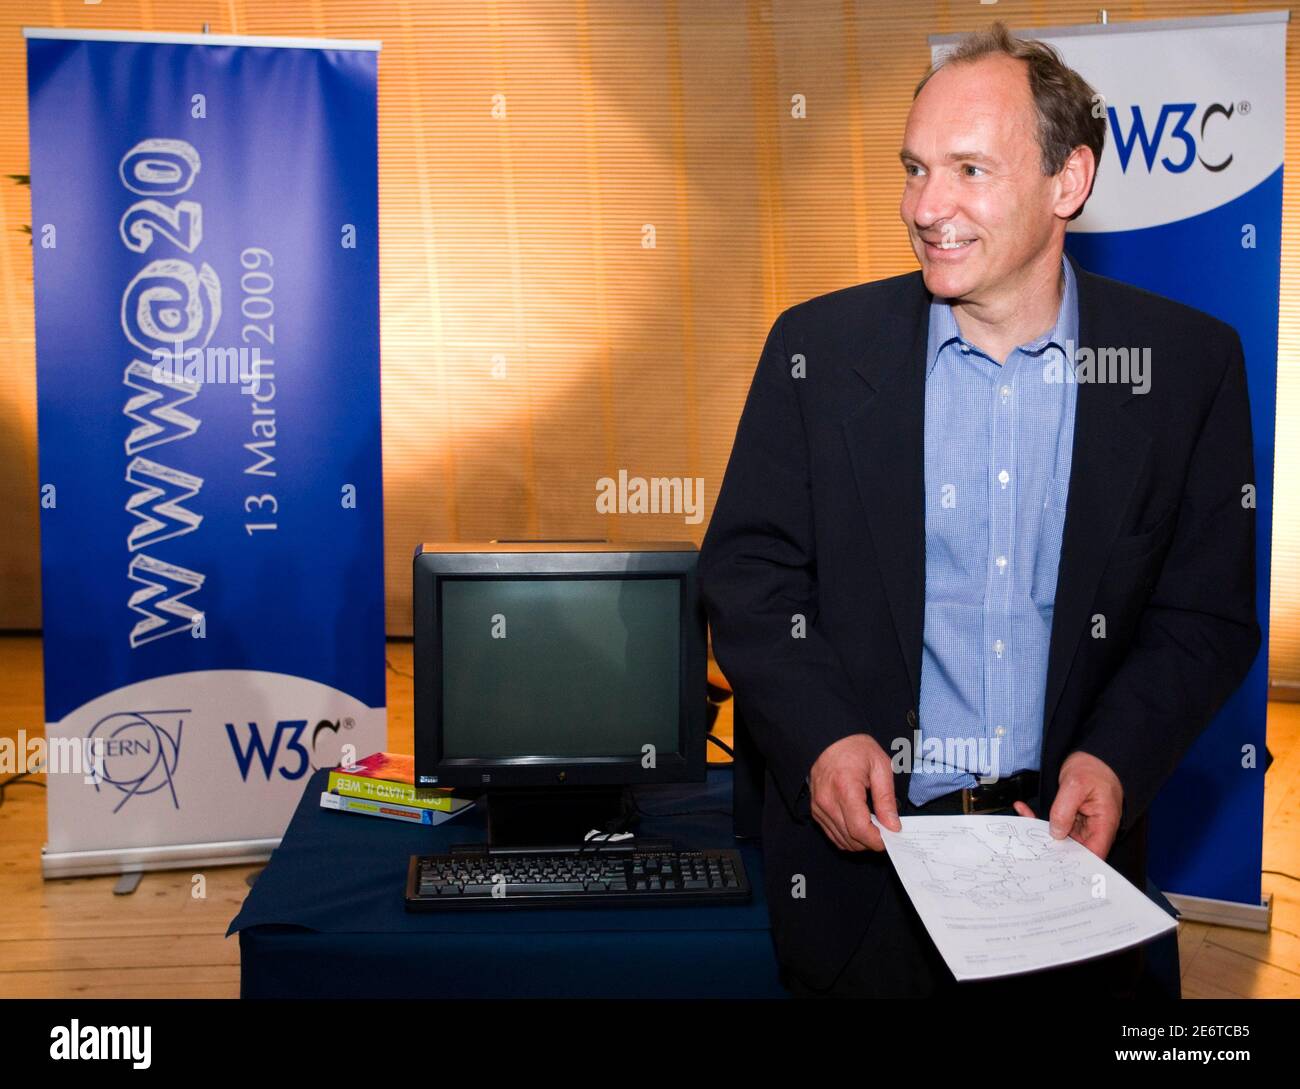 Tim Berners-Lee, credited with inventing the World Wide Web, poses with the NeXT computer, first web server, hypermedia browser and web editor, during a photo call before a conference marking the 20th